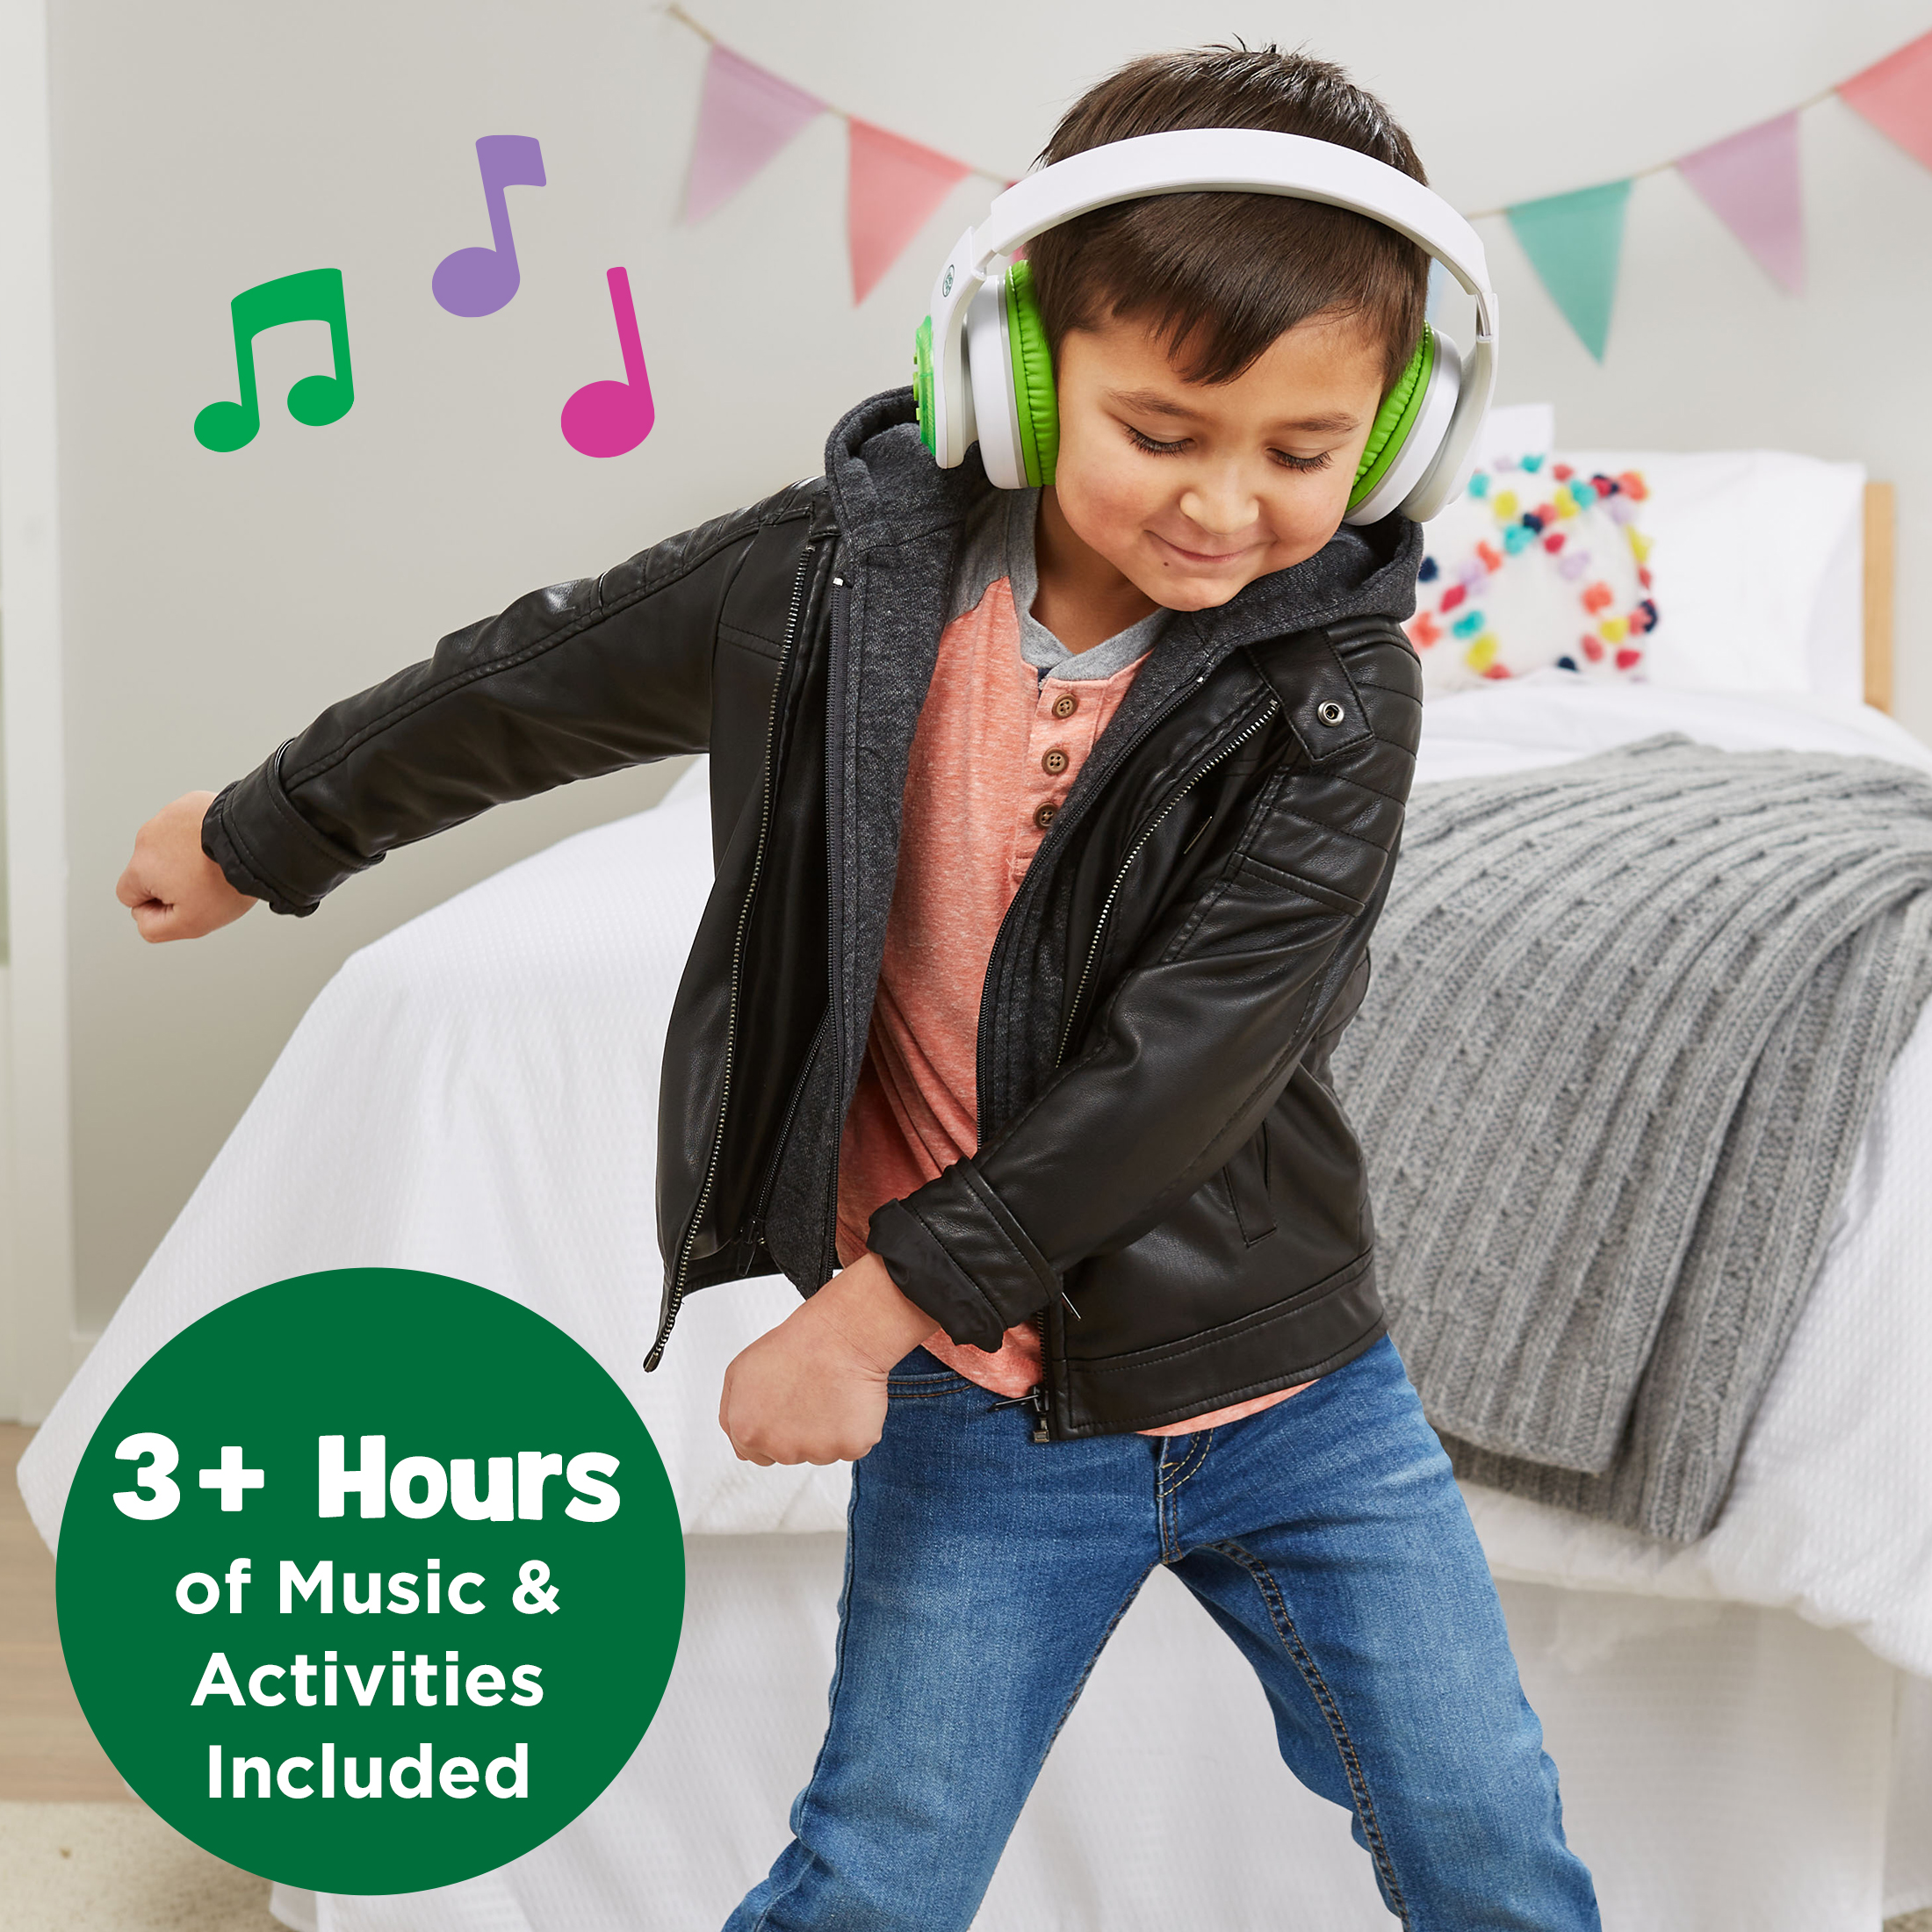 LeapPods Max™ Over-Ear Headphones for Kids, LeapFrog, Encourage Mindfulness, Imaginative Play - image 2 of 11